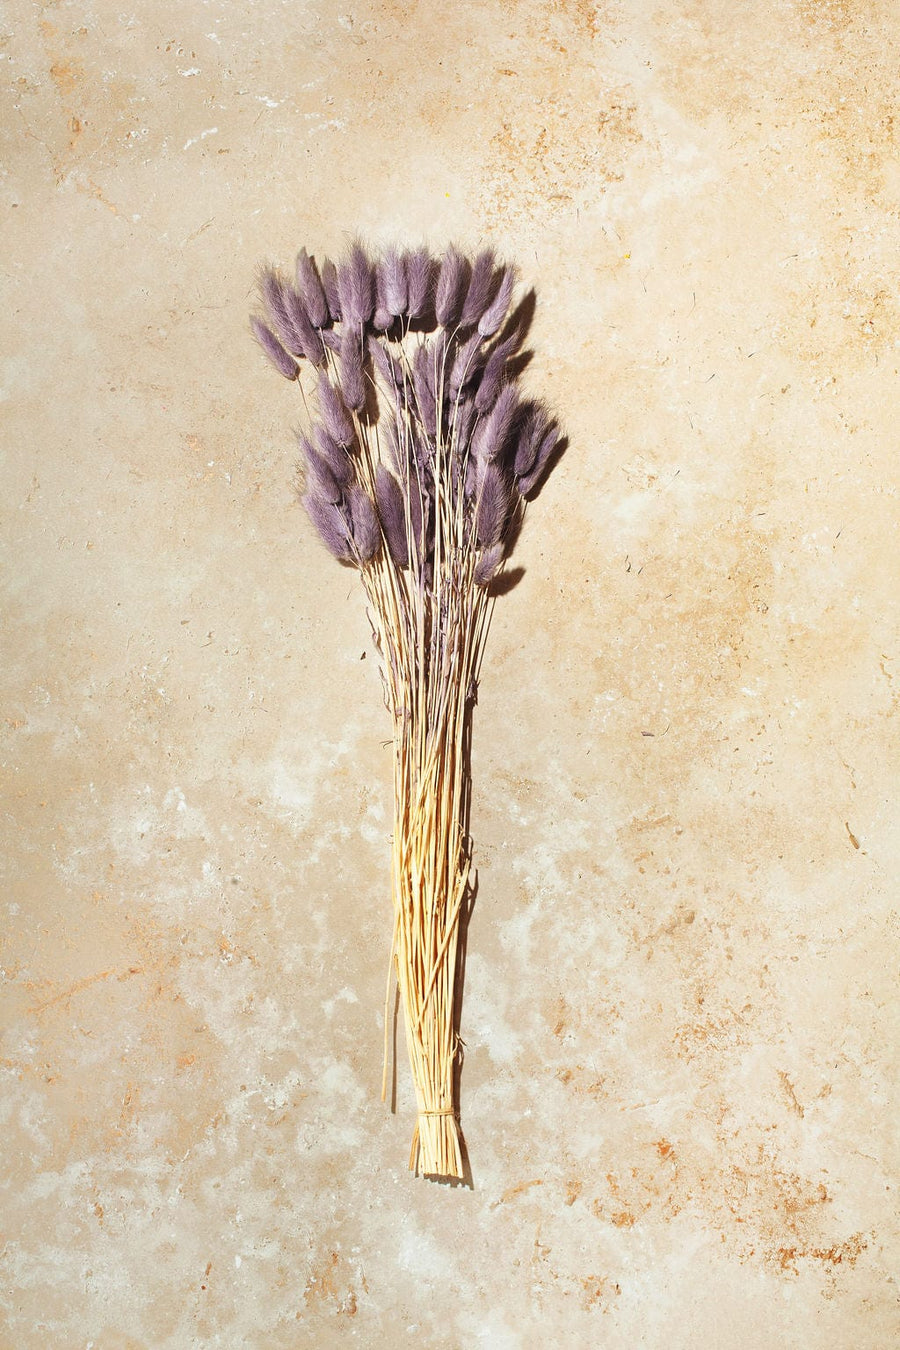 Idlewild Floral Co. Lavender Bunny Tail